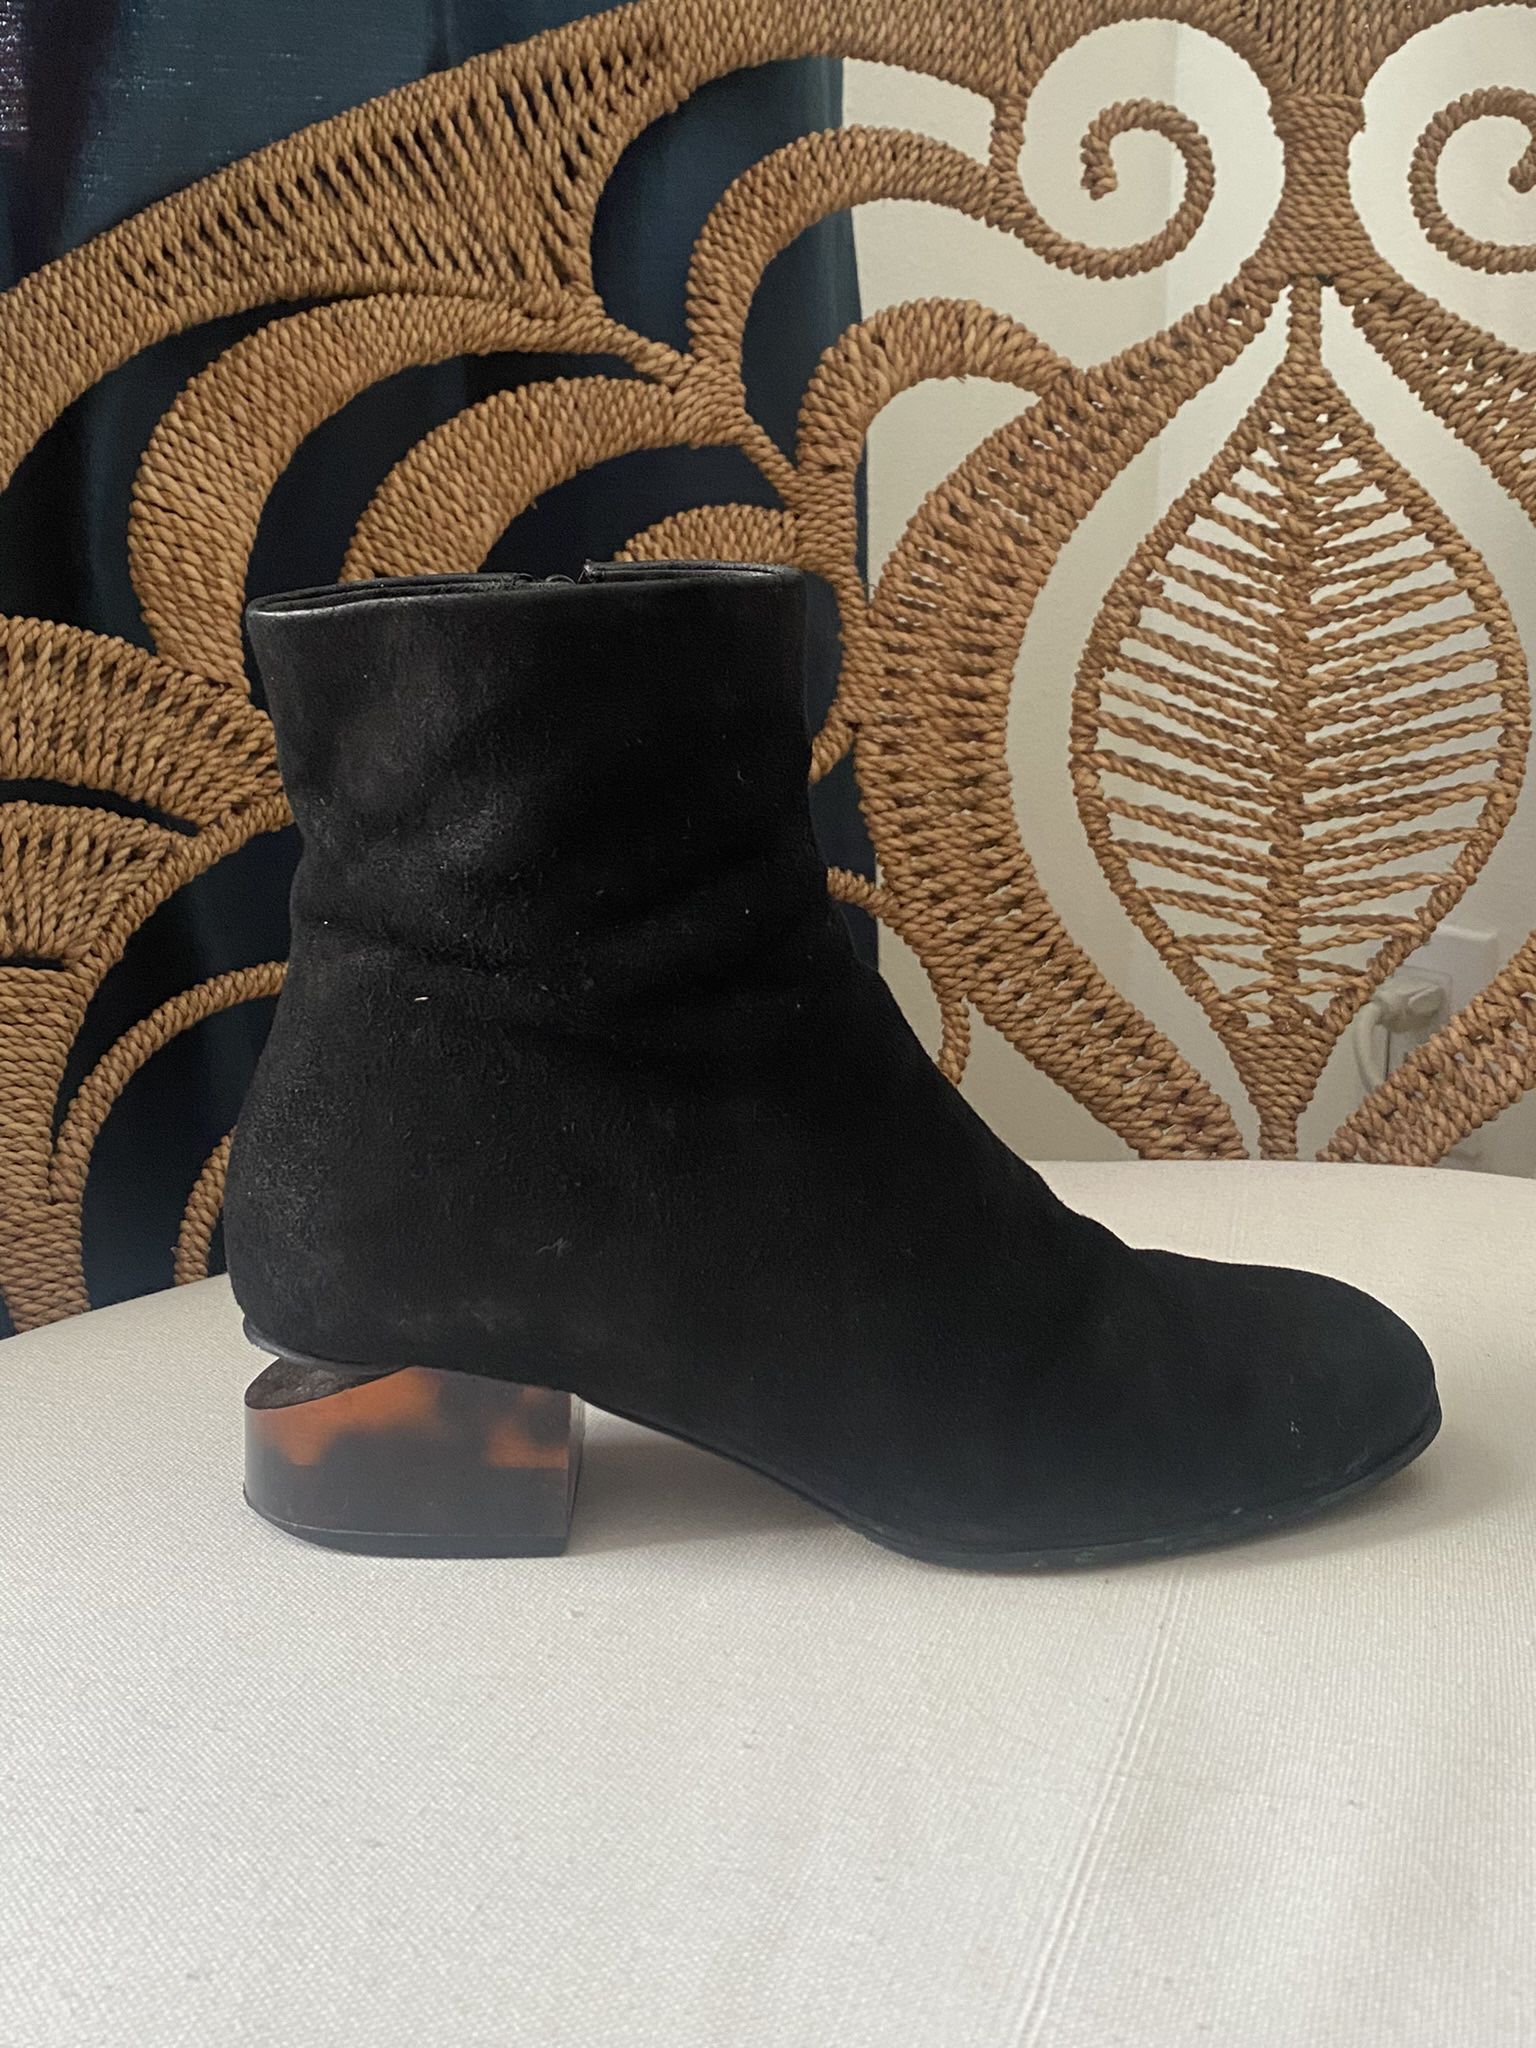 ALEXANDER WANG Size 35/5 Ankle Boots Suede Tortoise